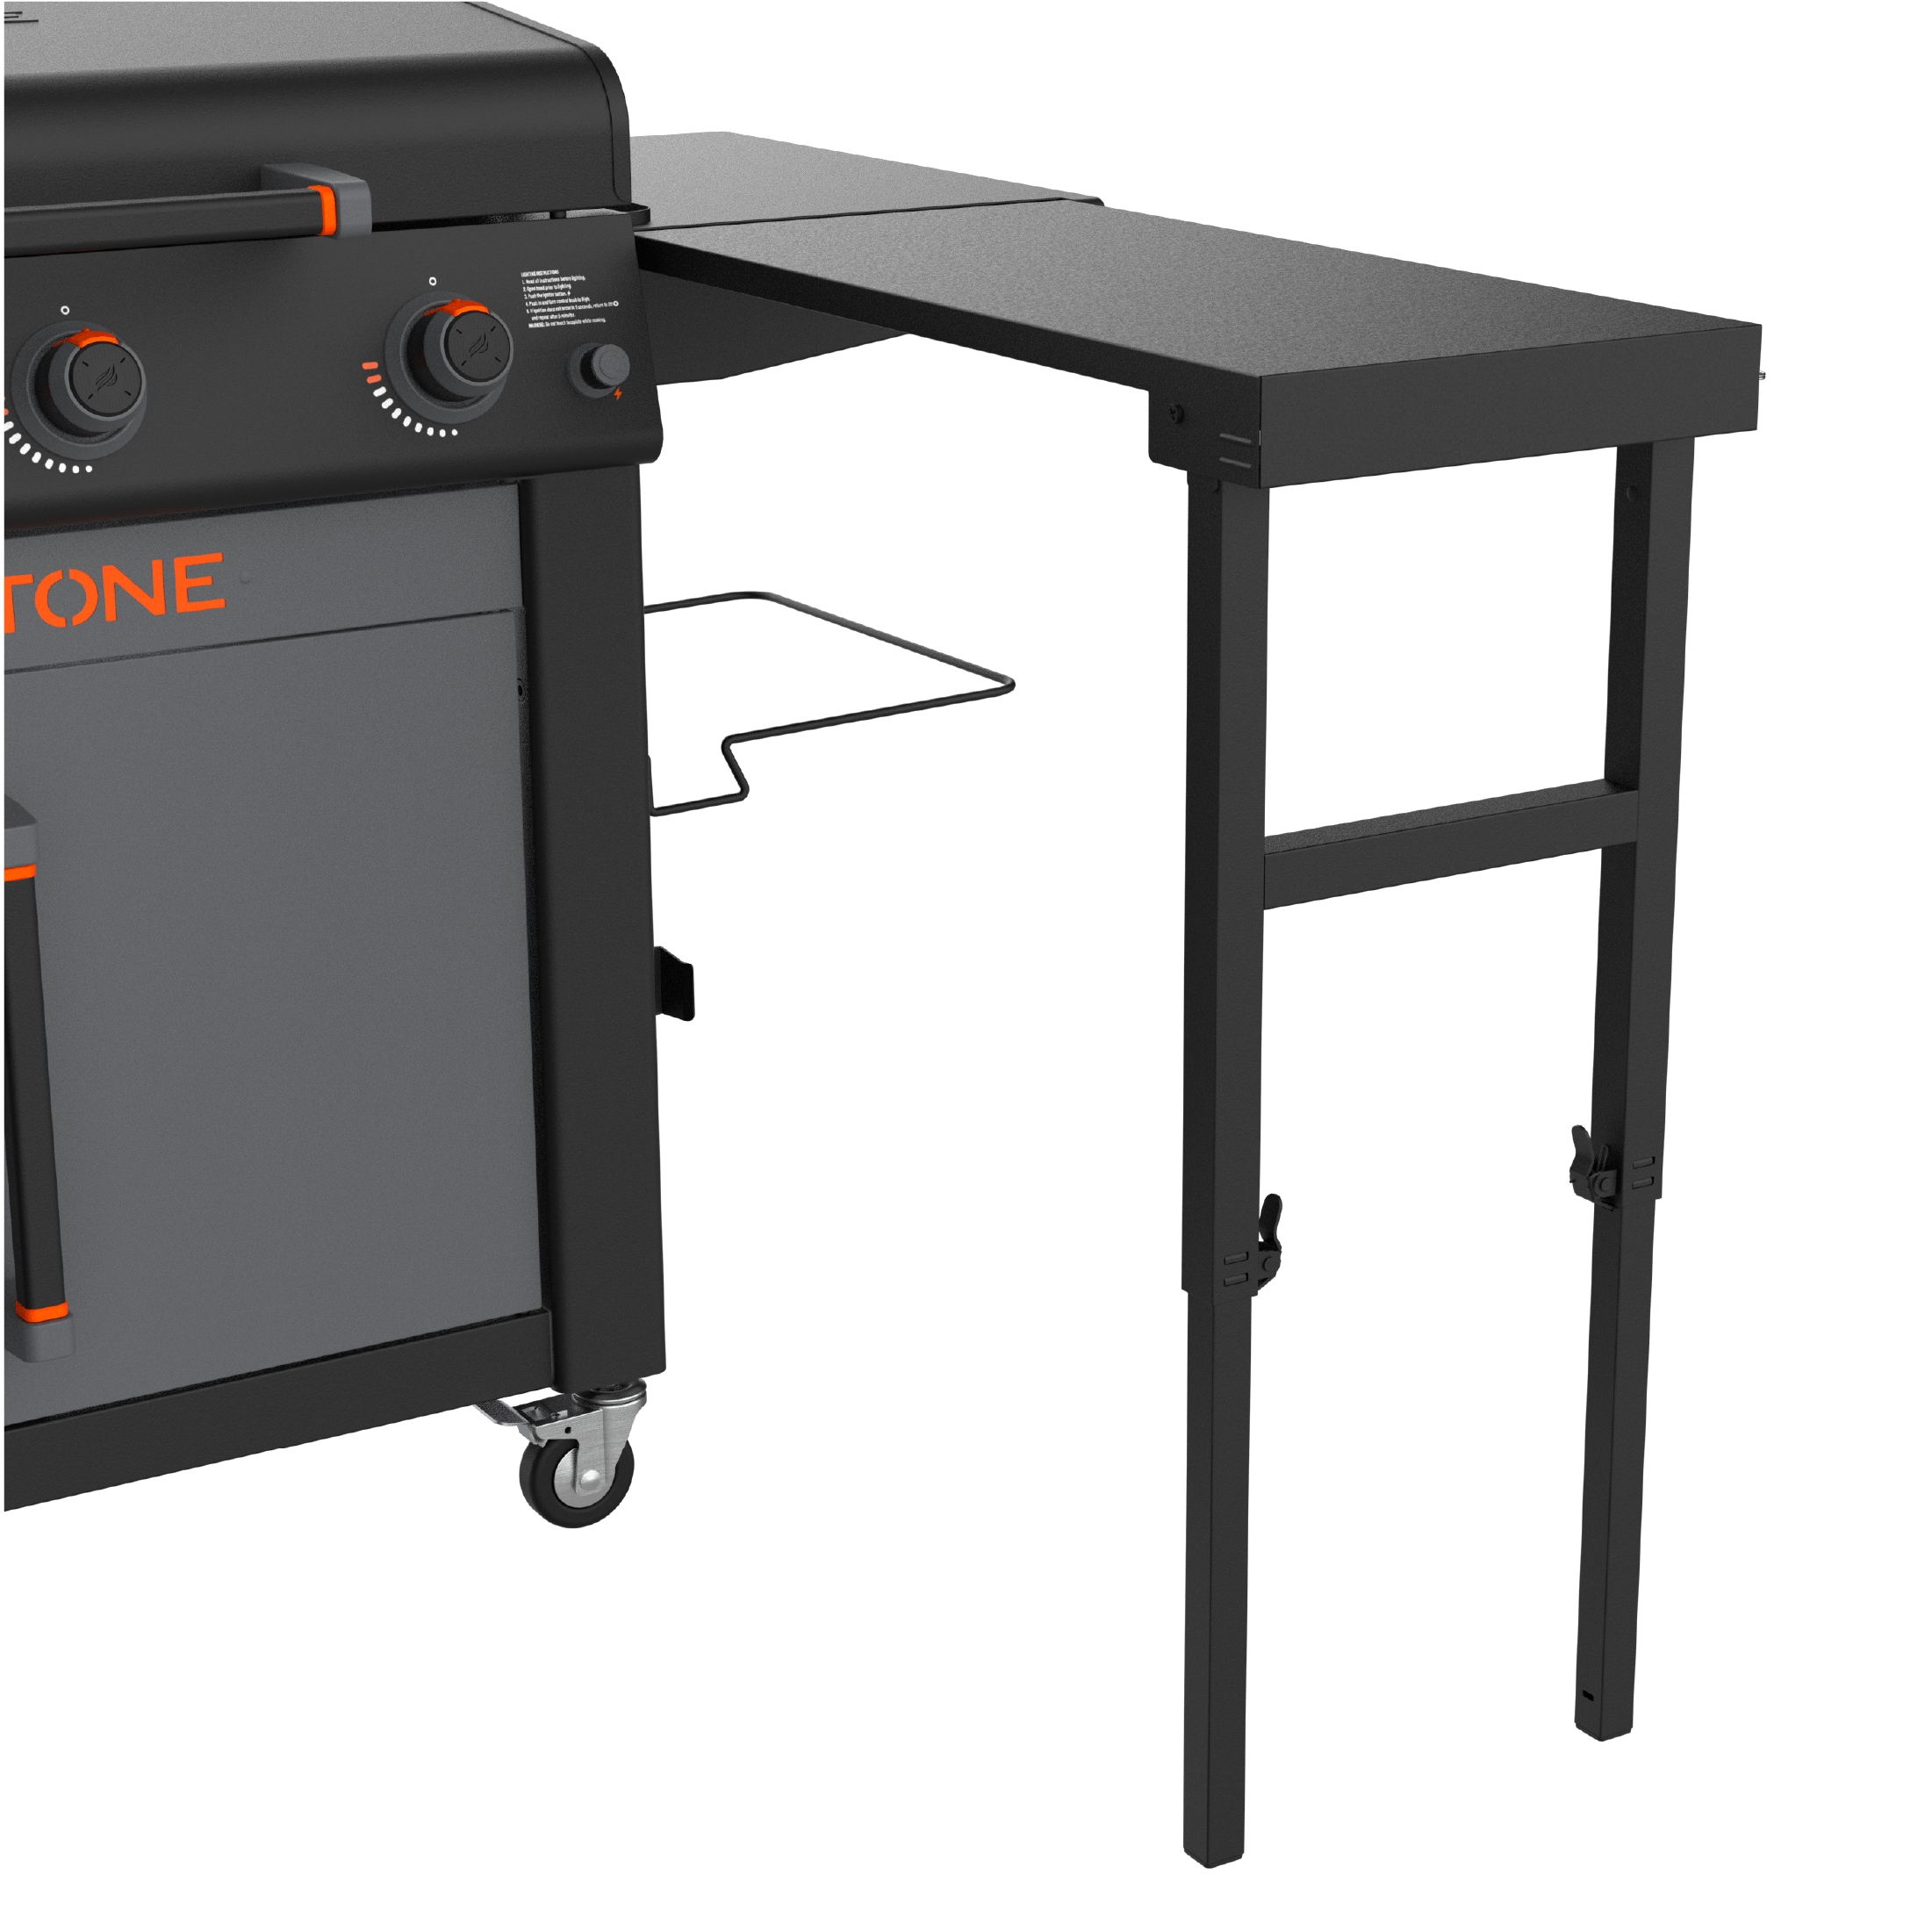 Blackstone 36-in Culinary Omnivore Griddle with Hood 4-Burner Liquid Propane Flat Top Grill | 2162